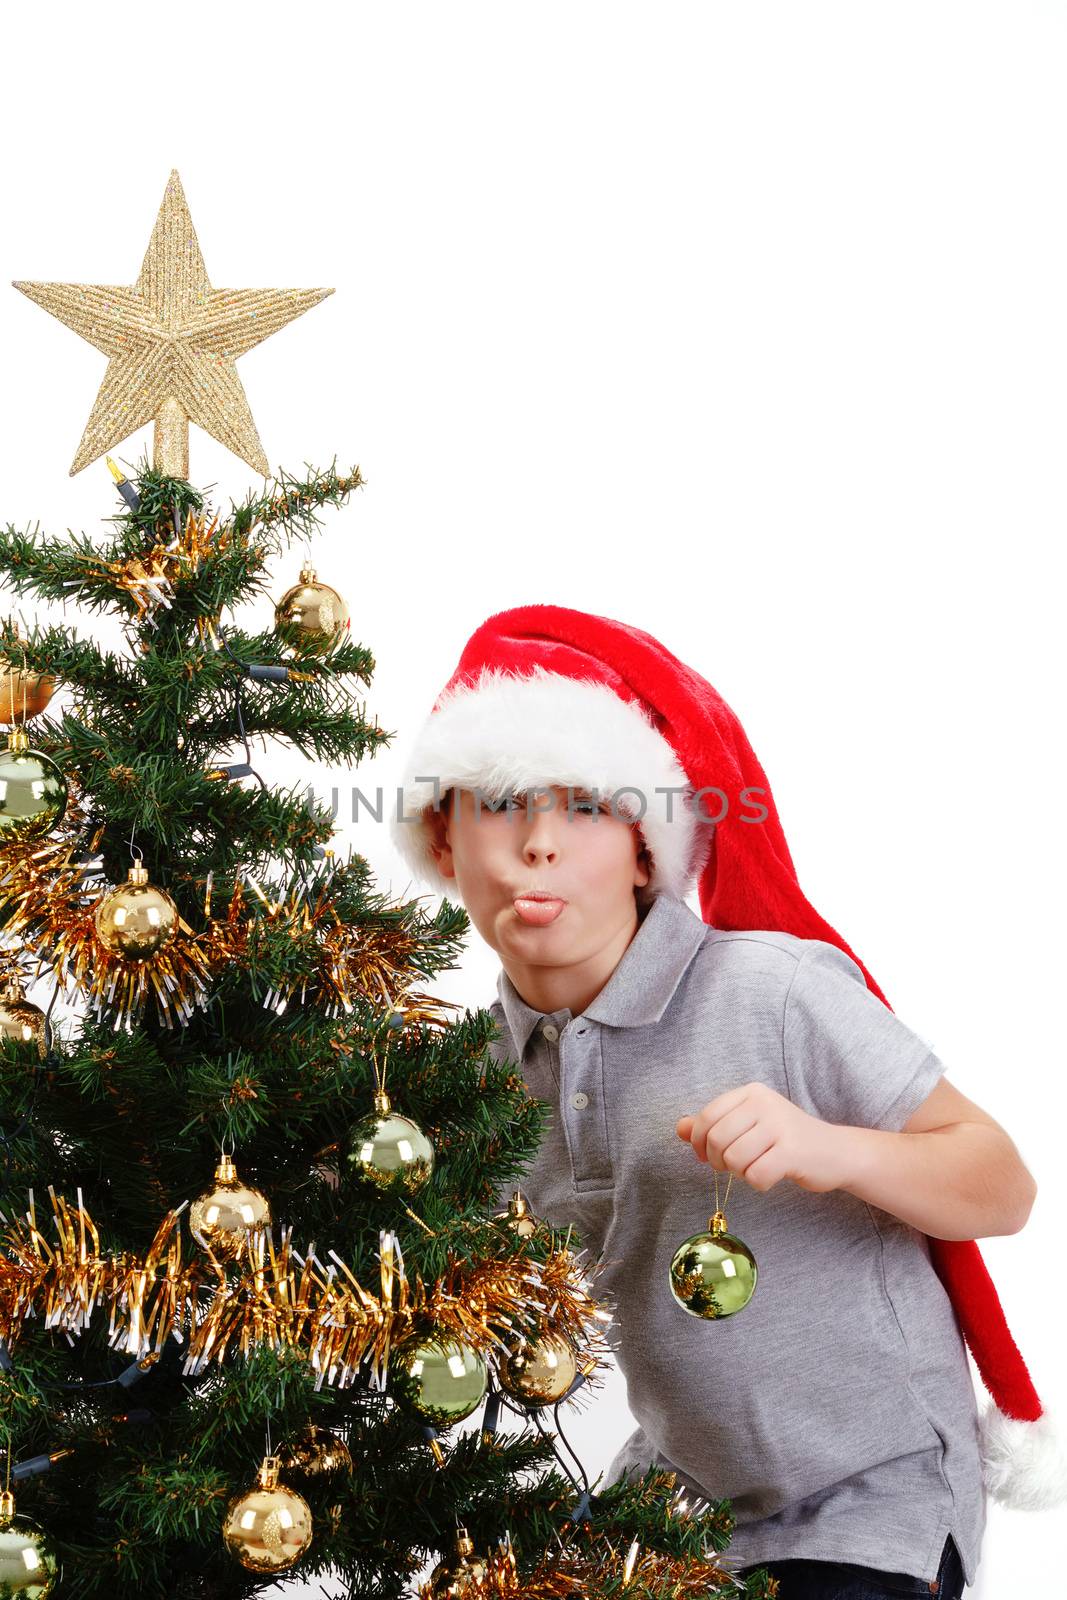 Boy with santa hat sticking out tongue at  the Christmas tree on white background